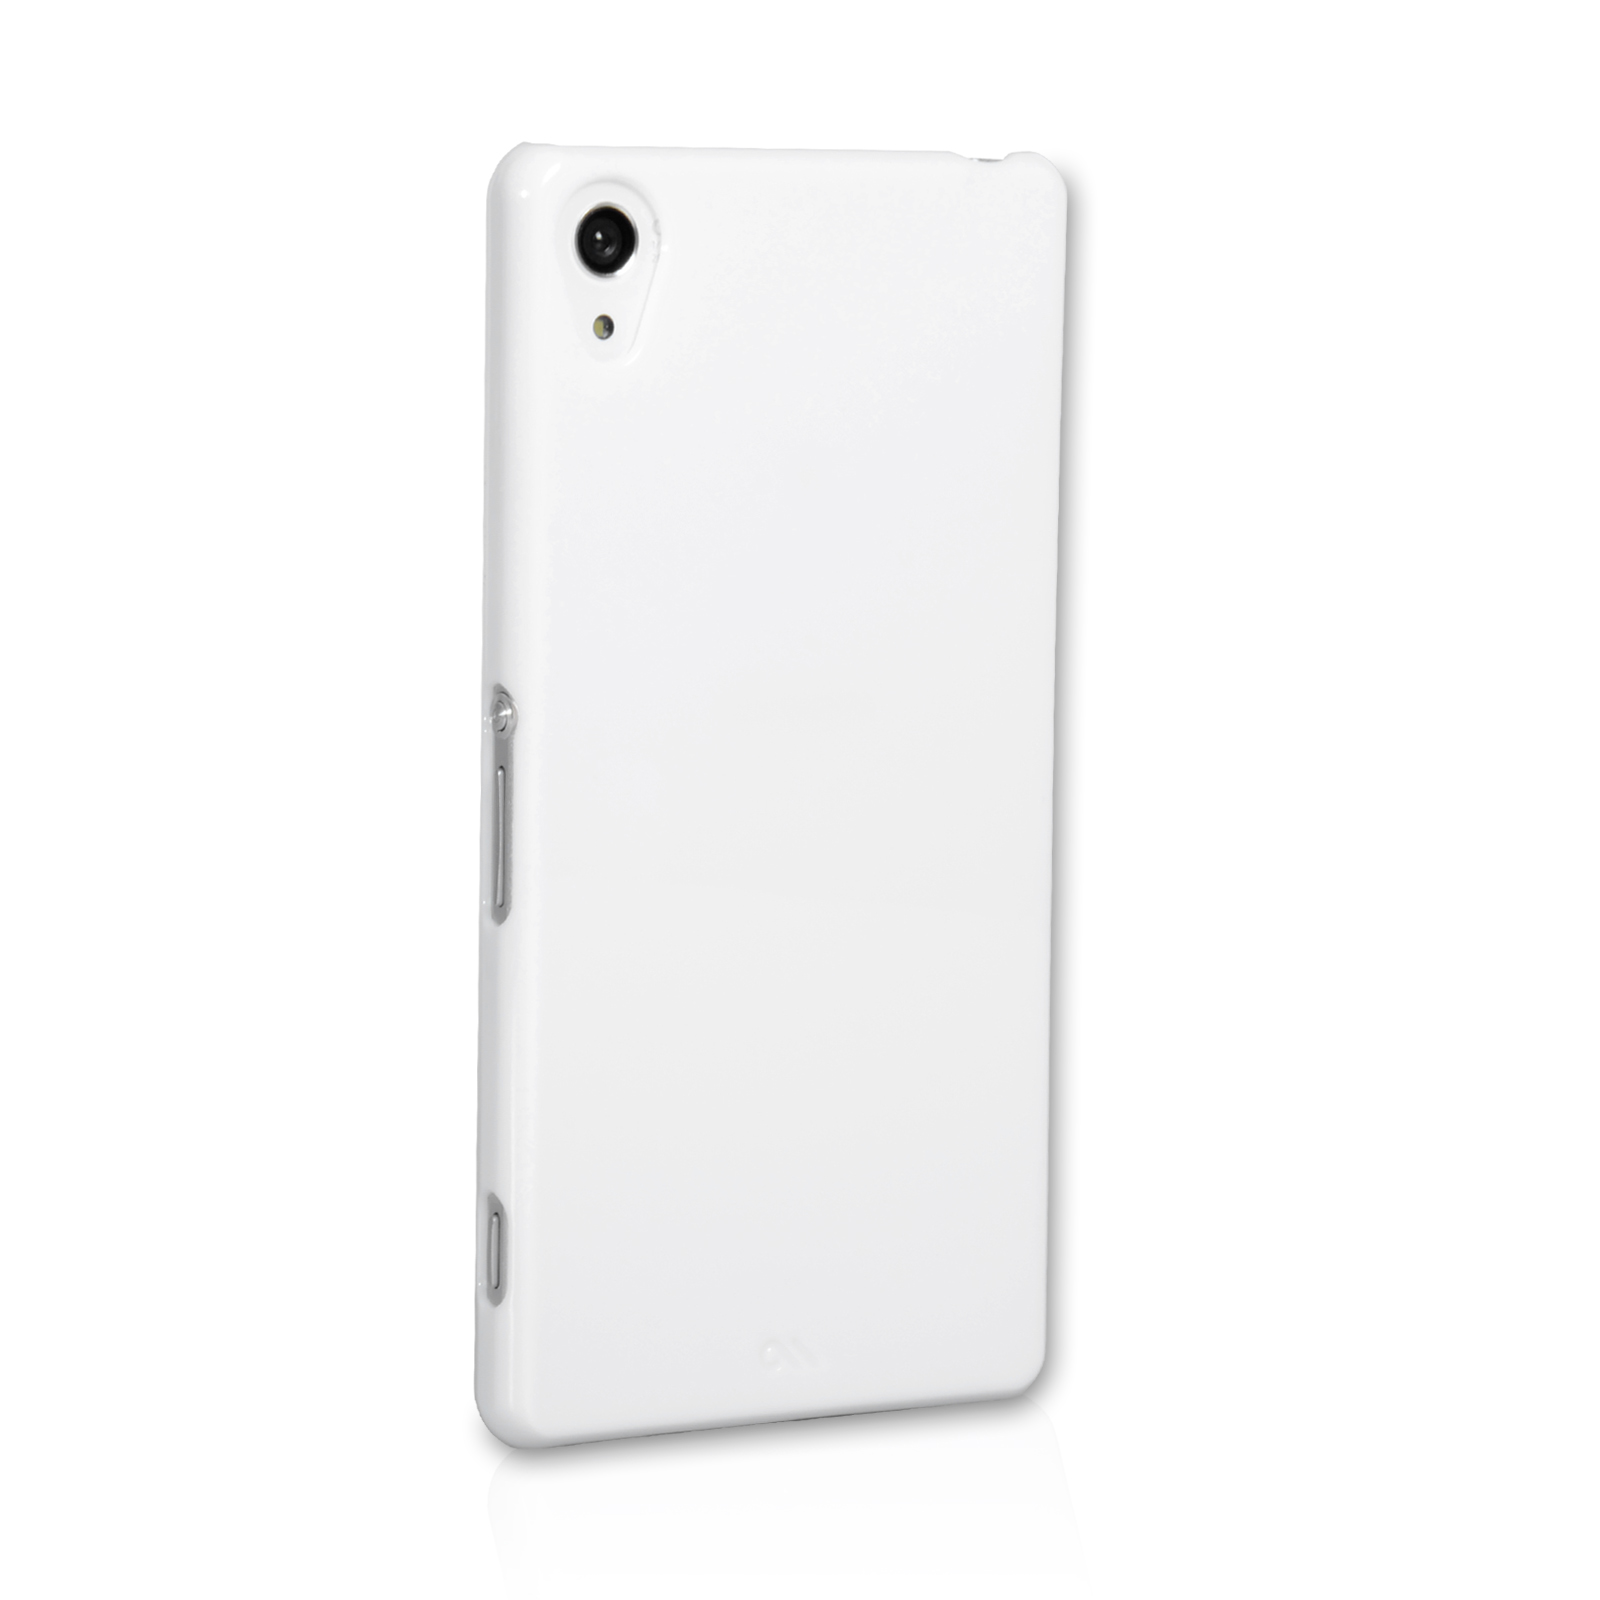 Case Mate Barely There for Sony Xperia Z2 - White